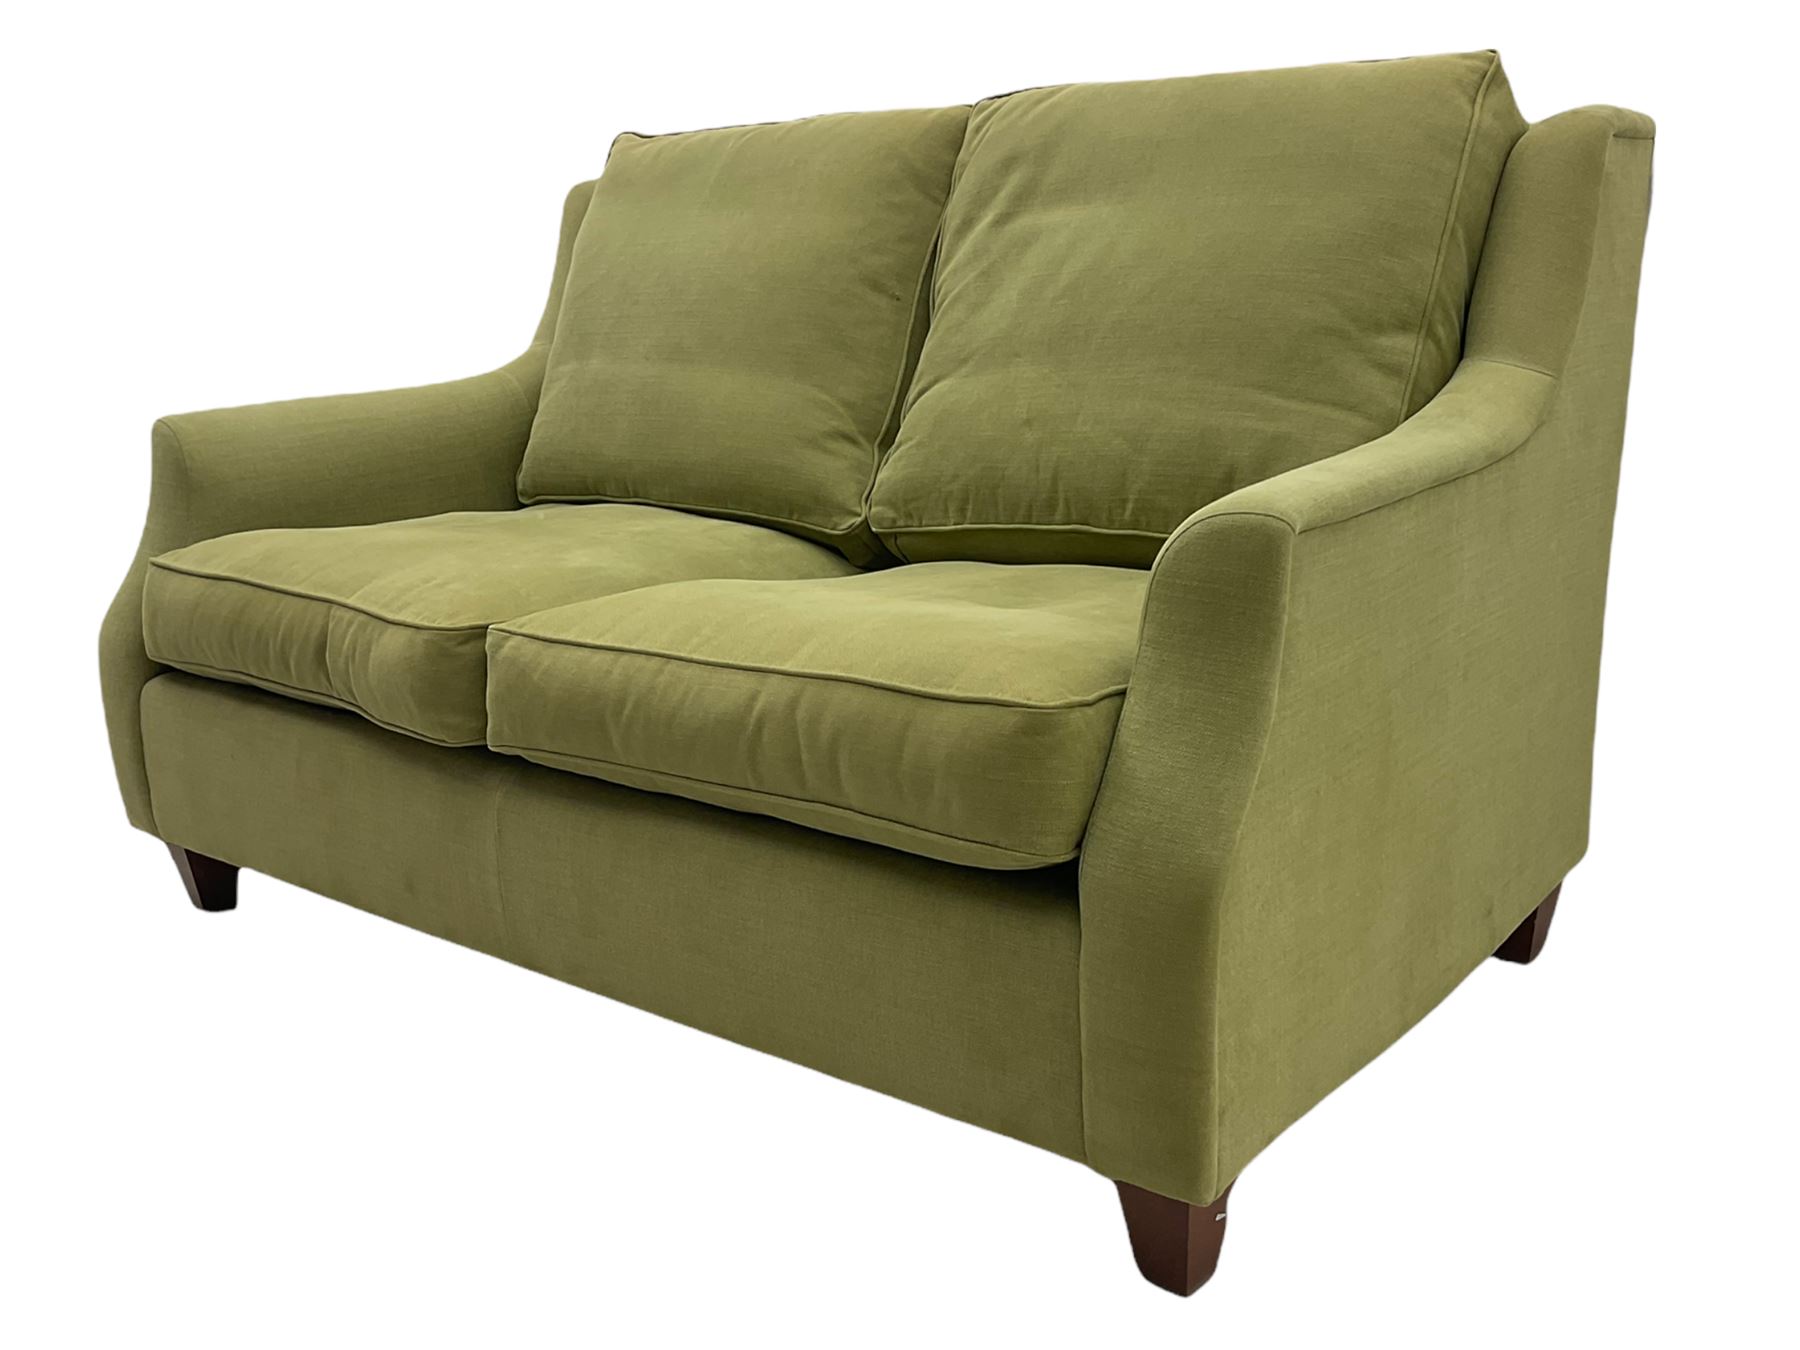 Wesley-Barrell two seat sofa and pair of matching armchairs - Image 3 of 20